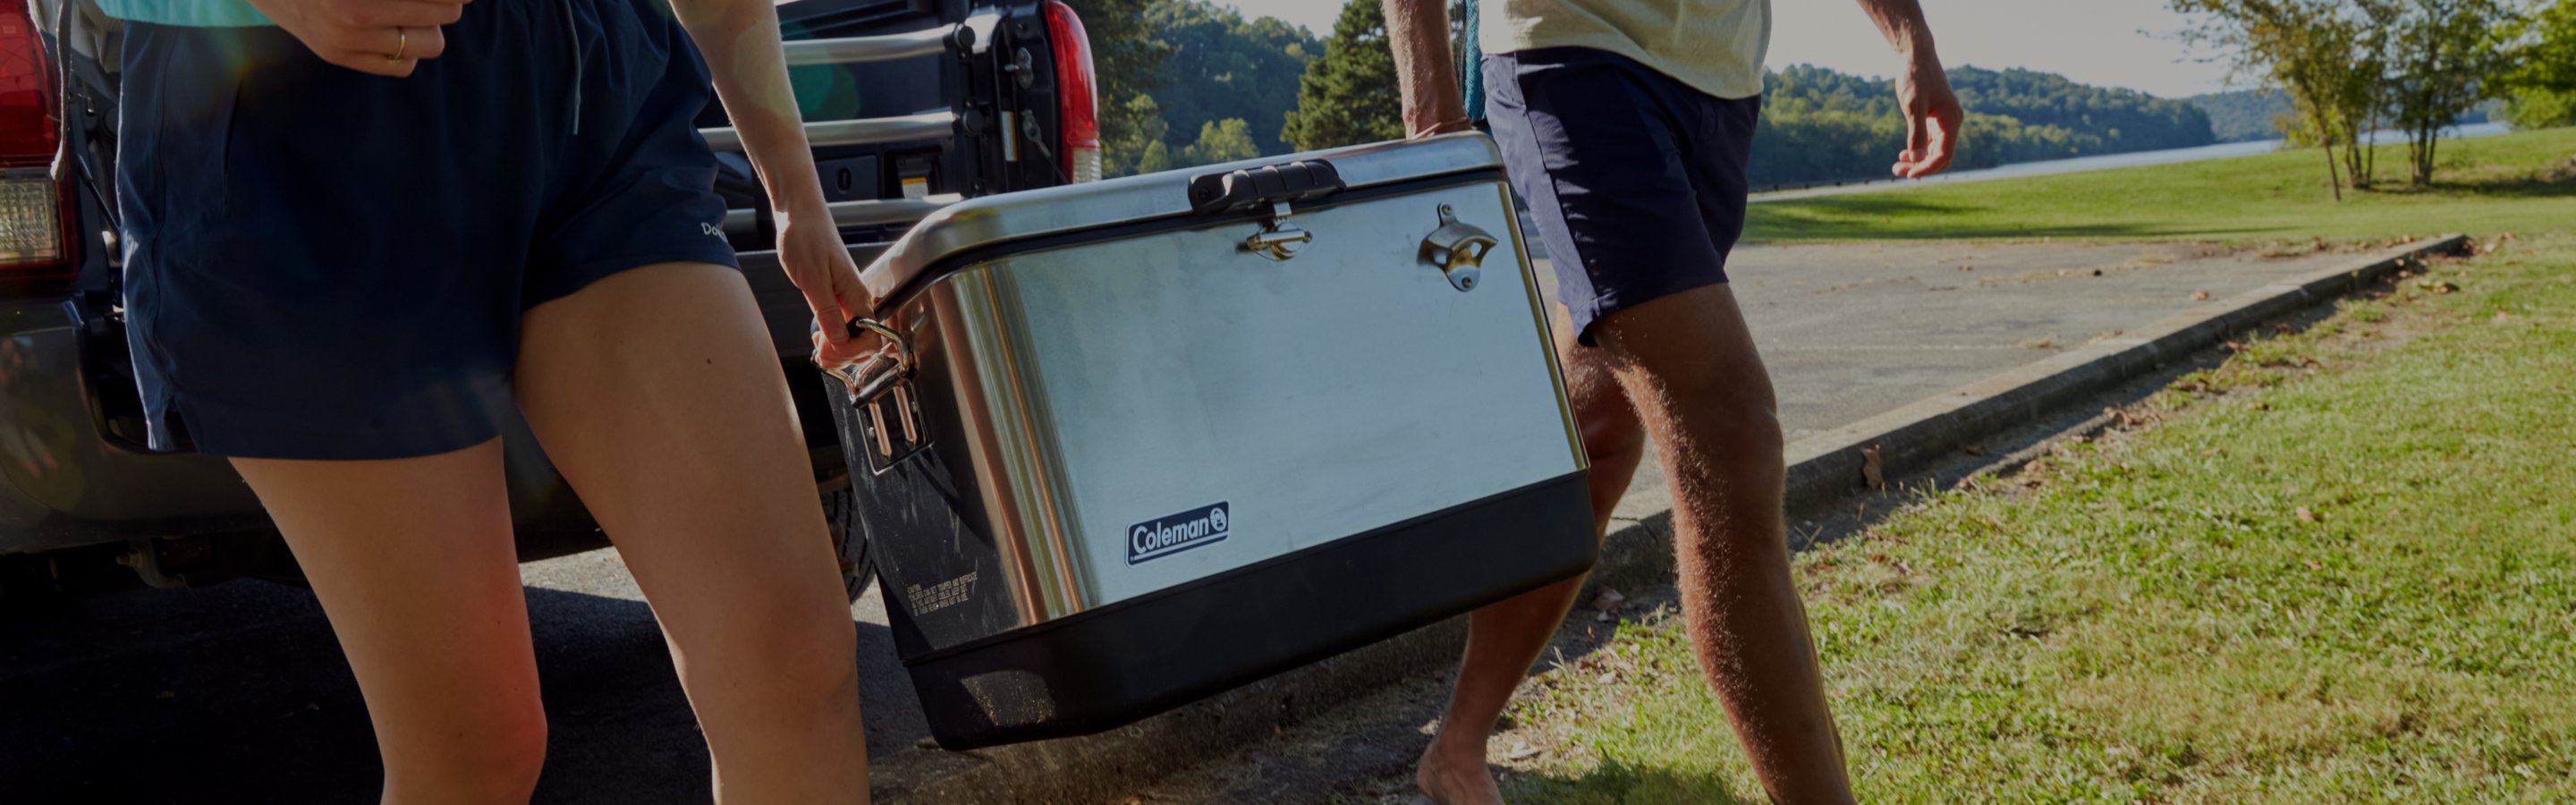 hard cooler with side carry handles